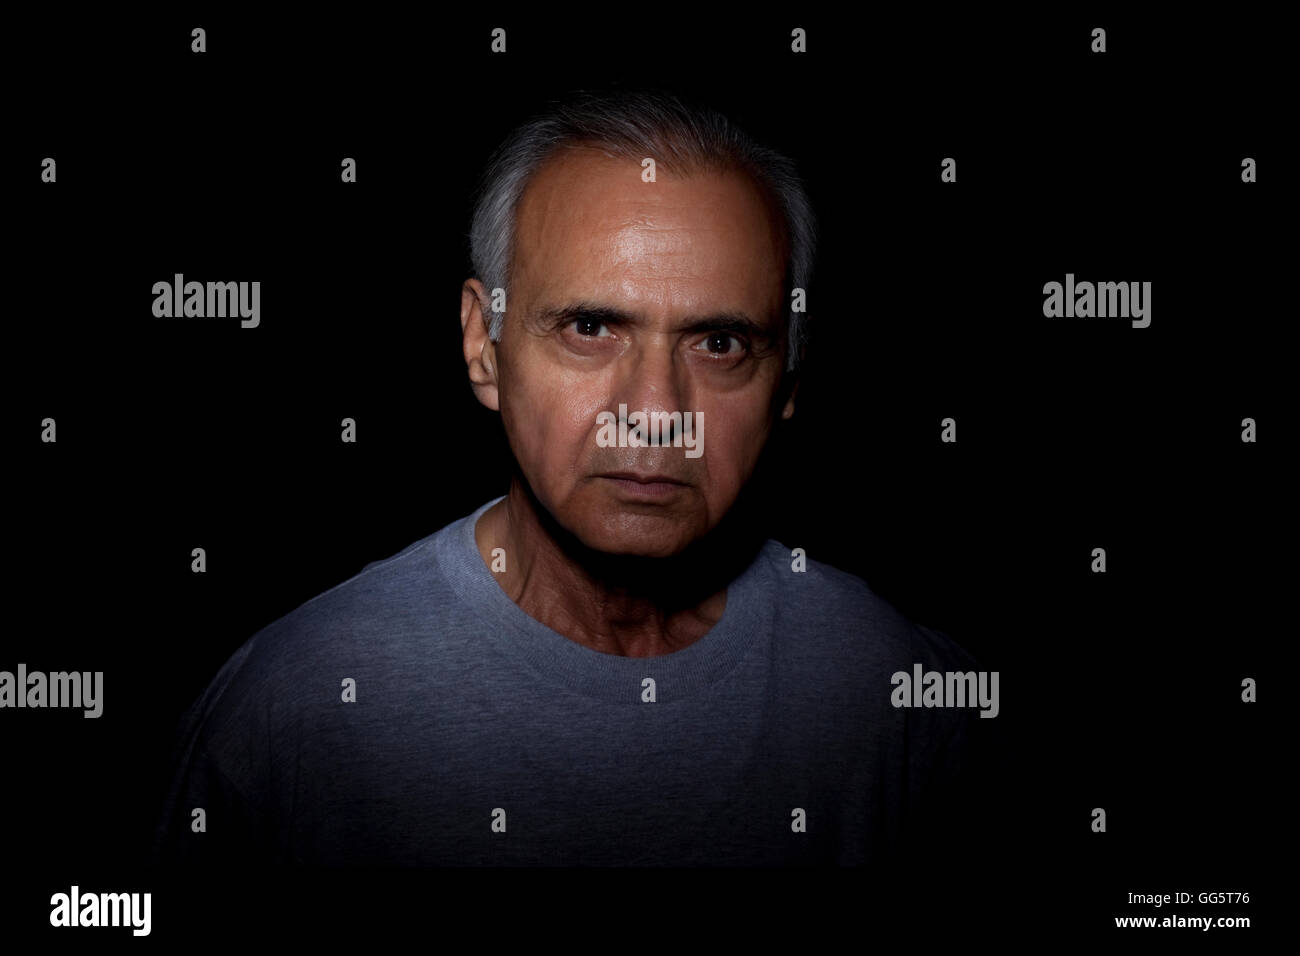 Portrait of serious man over black background Stock Photo